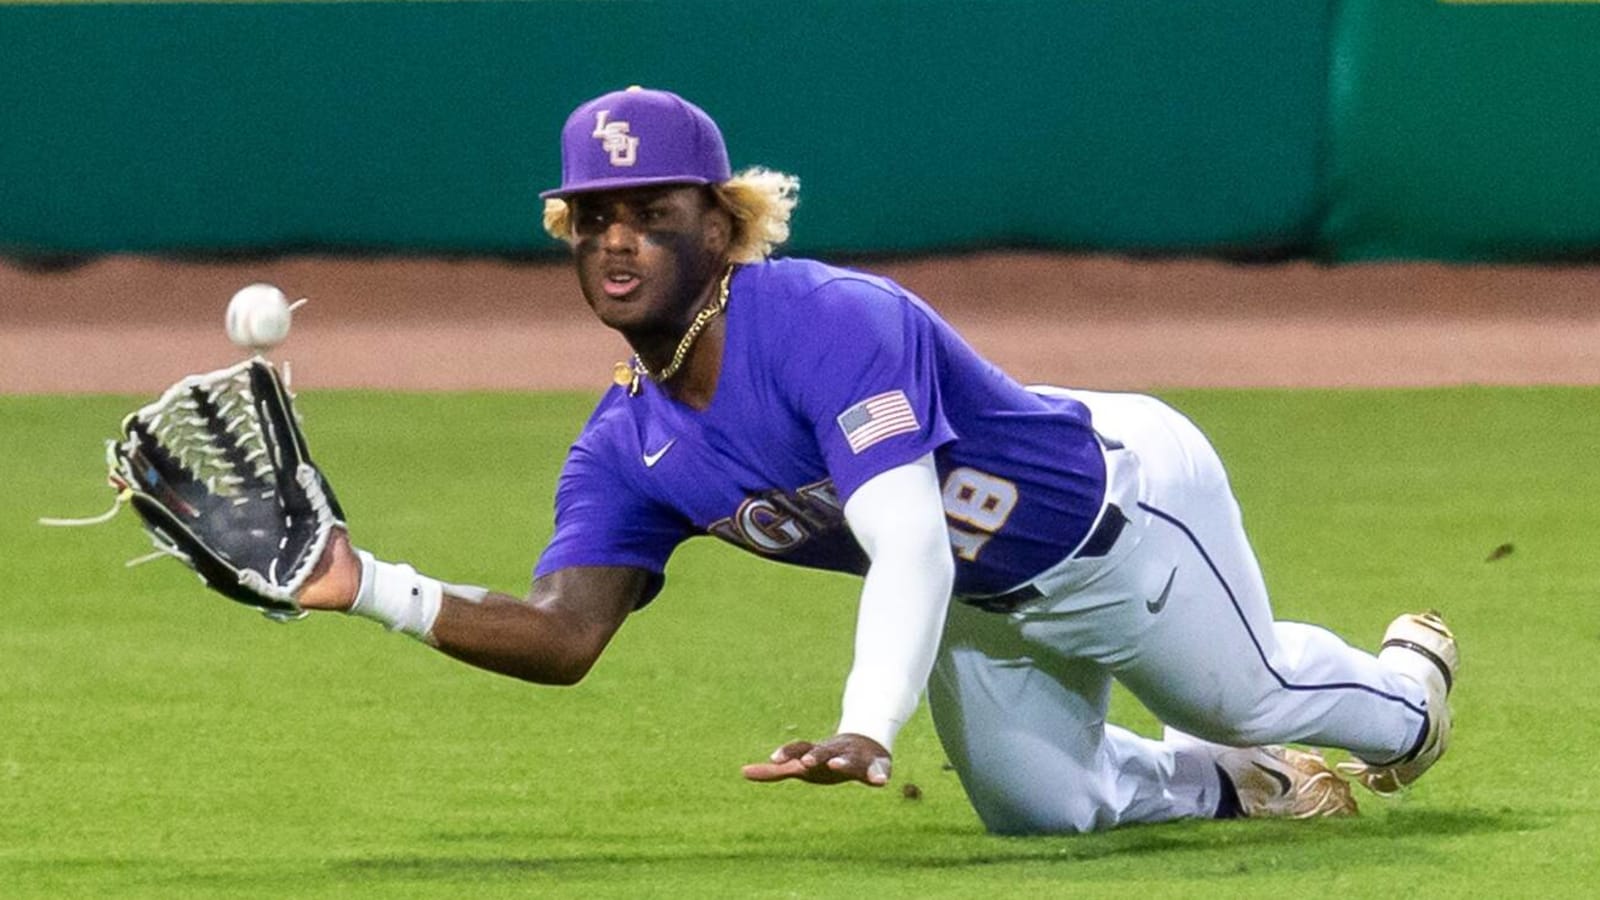 Watch: LSU outfielder makes bid for catch of the year